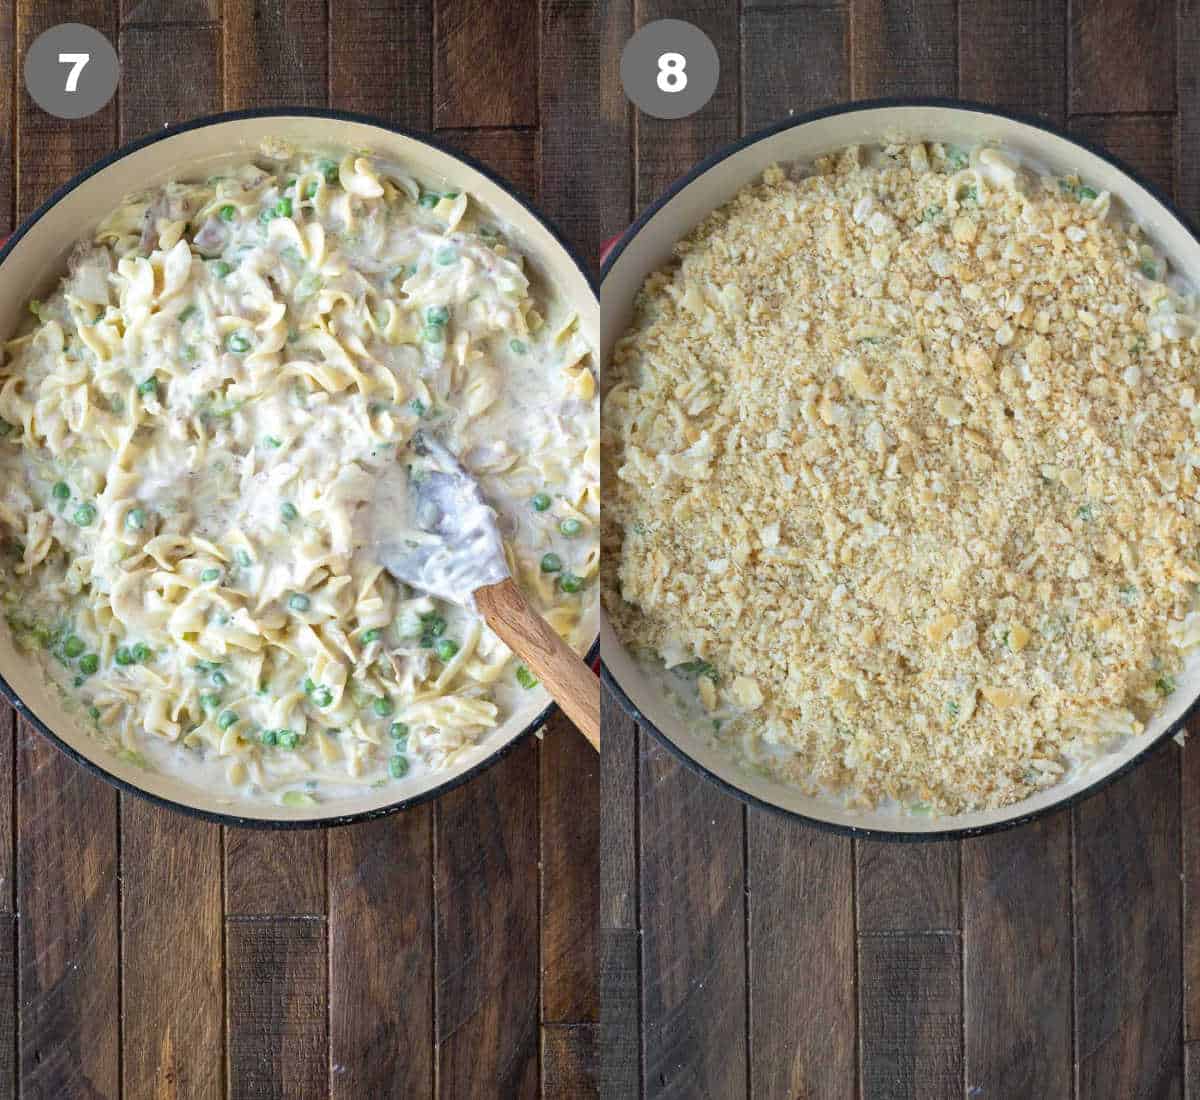 Everything mixed together in the skillet then crushed crackers sprinkled on top.